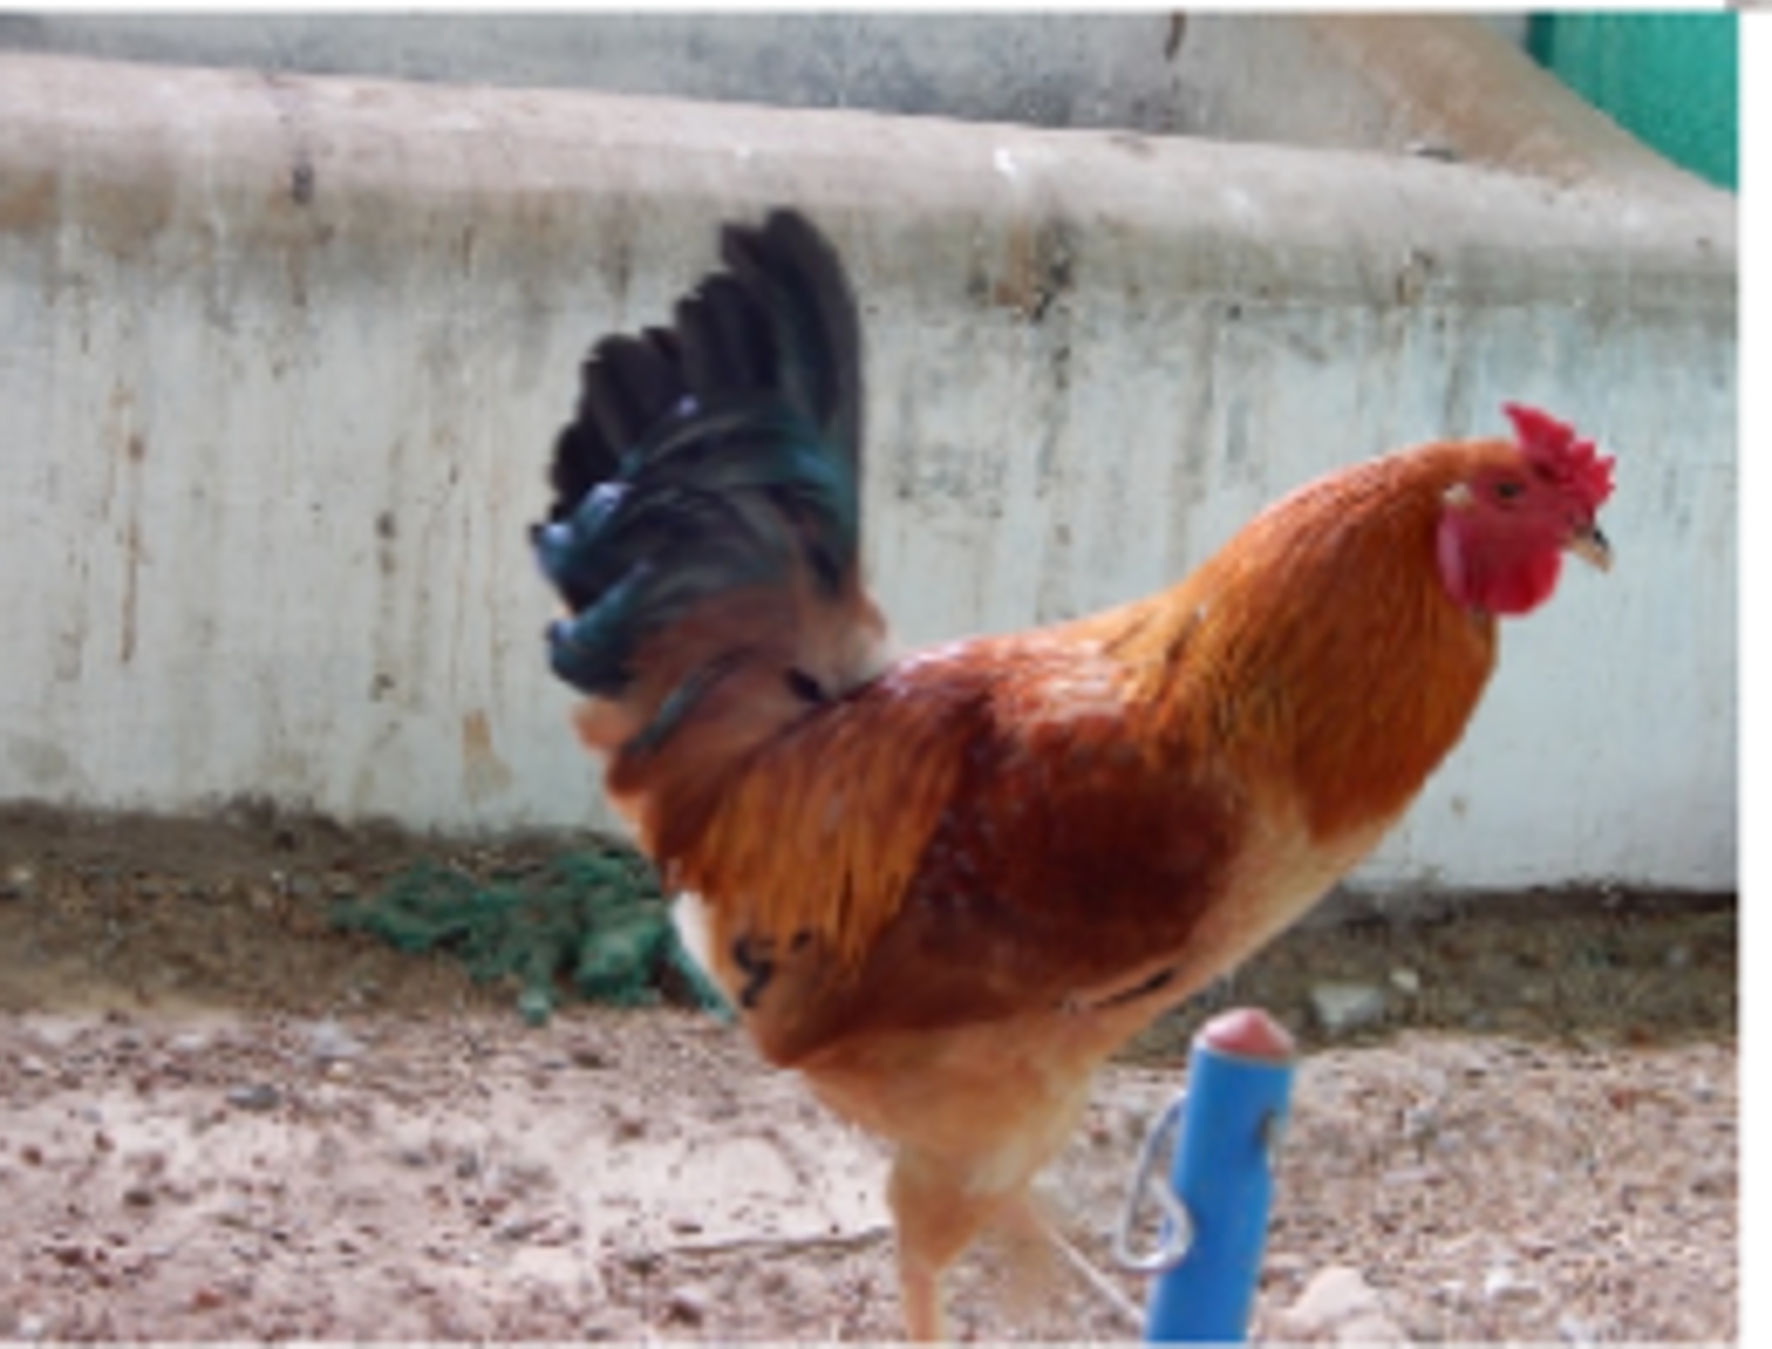 Farmers are motivated to poultry